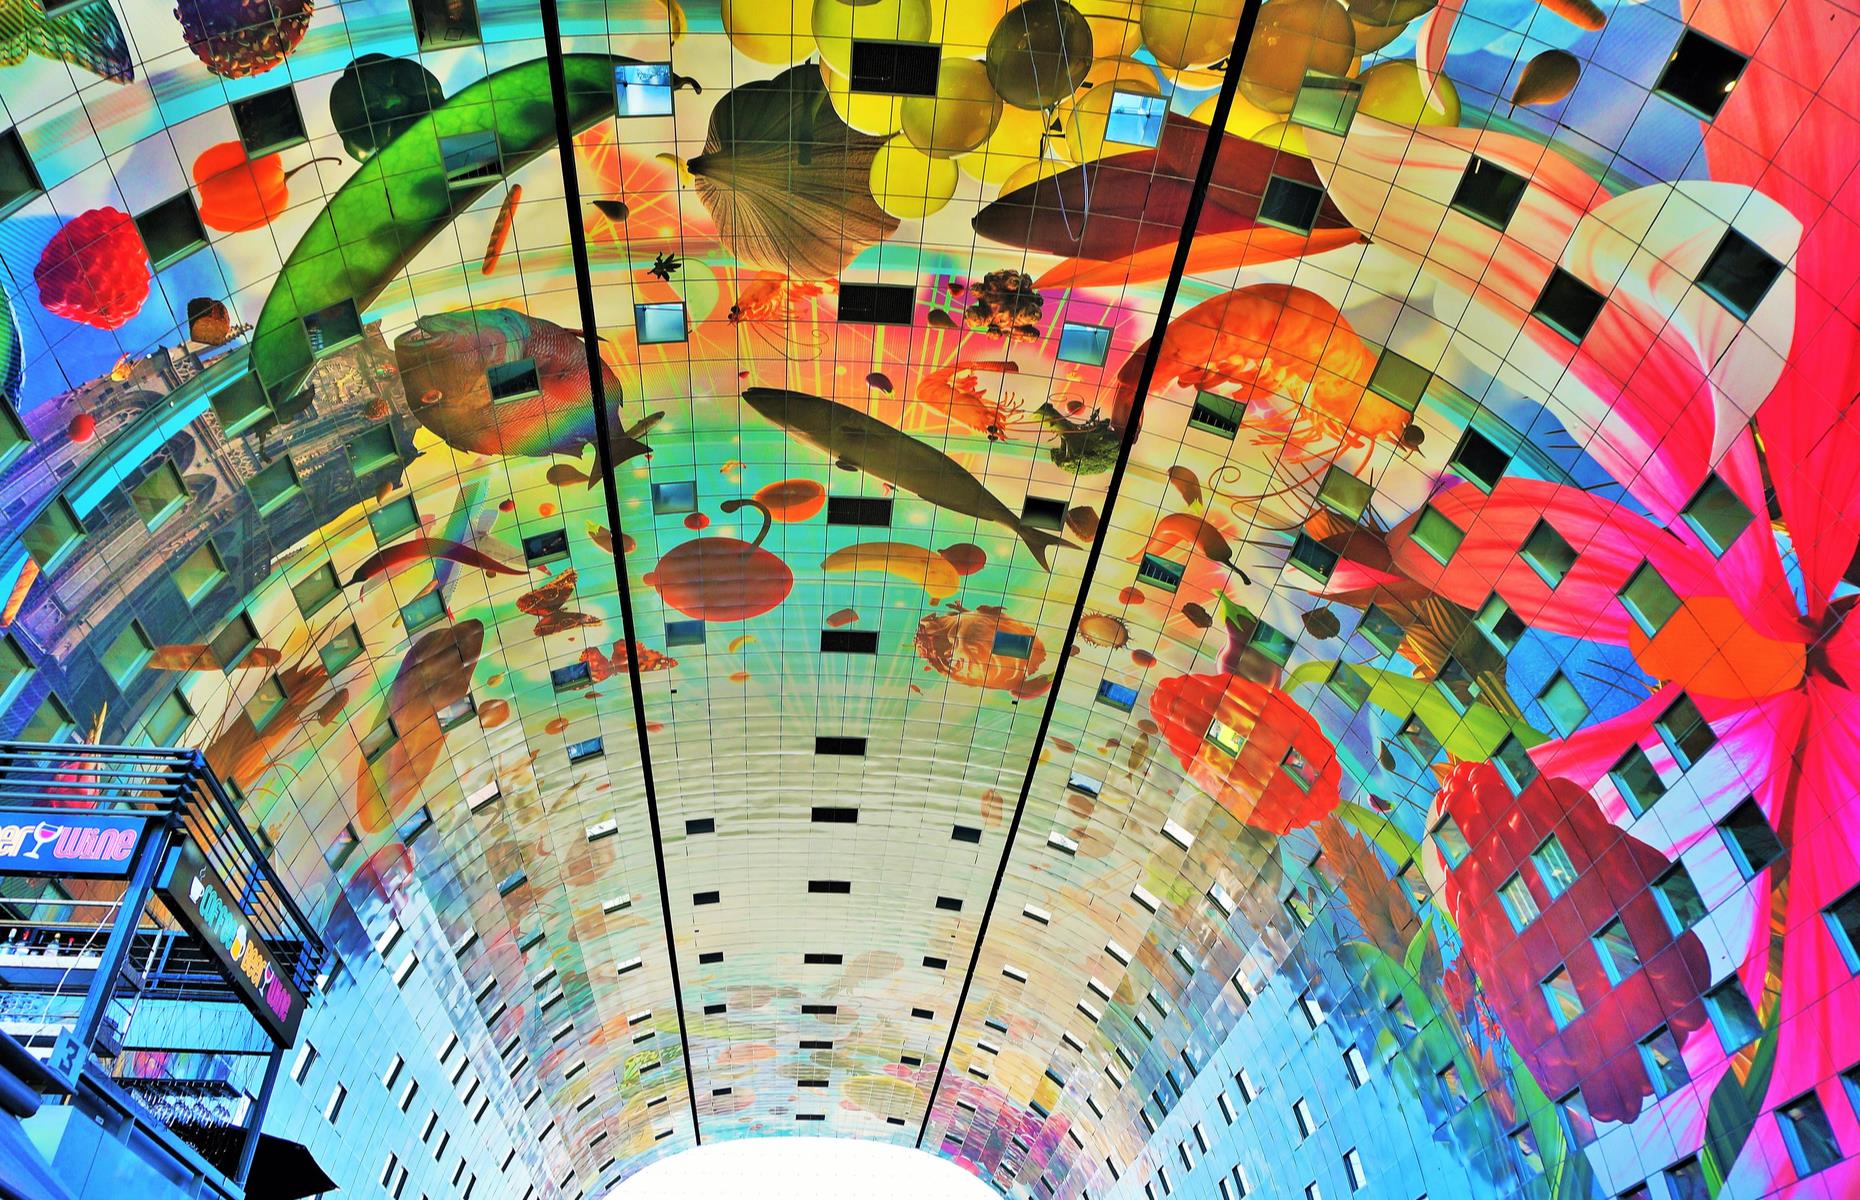 Slide 22 of 33: The gigantic and vibrant ceiling mural covering the ceiling of Rotterdam’s covered market is one the biggest artworks in the world. Cornucopia by Dutch artists Arno Coenen and Iris Roskam measures over 36,000 square feet (3,344sqm) and spans the entire interior of De Markthal. The creative port city has a wealth of bold architecture and eye-catching public art. See some of the best on a dedicated walk (face masks are compulsory).